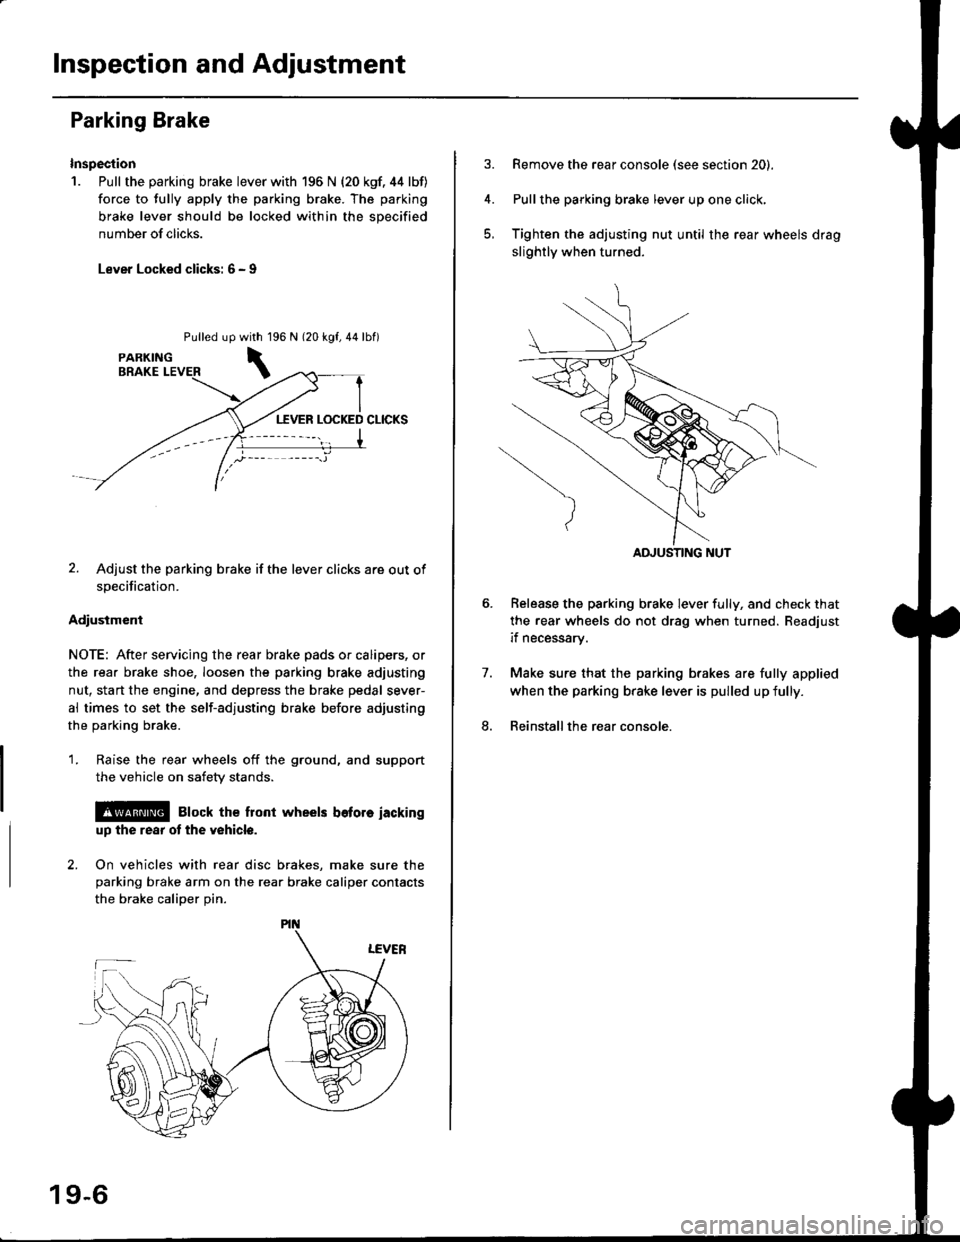 HONDA CIVIC 1997 6.G Workshop Manual Inspection and Adjustment
Parking Brake
Inspection
1. Pull the parking brake lever with 196 N {20 kgf. 44 lbf)
force to fully apply the parking brake. The parking
brake lever should be locked within t